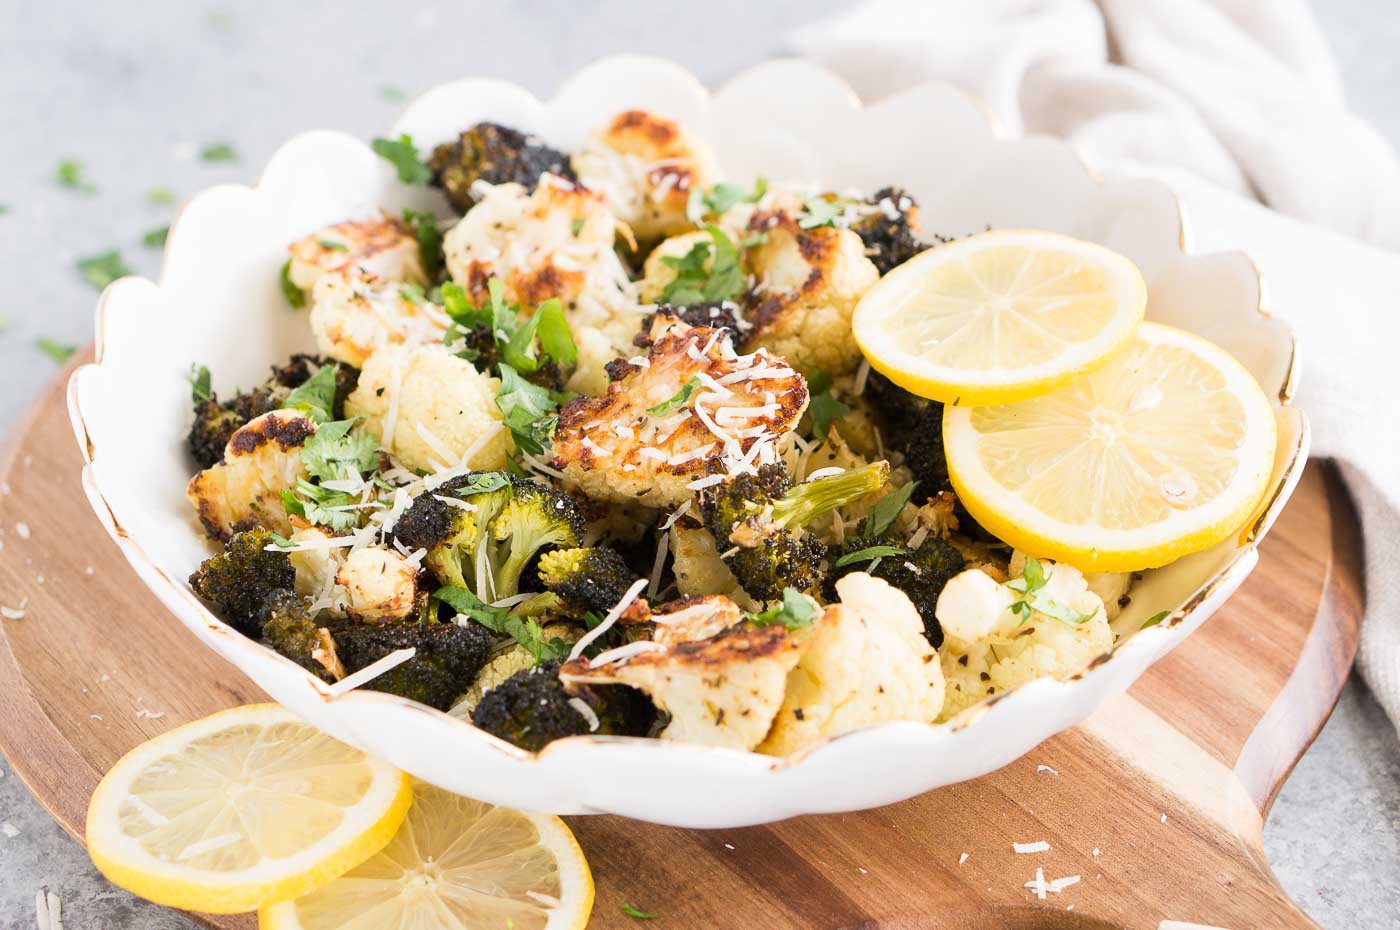 oven roasted broccoli and cauliflower served in a bowl with lemon slices